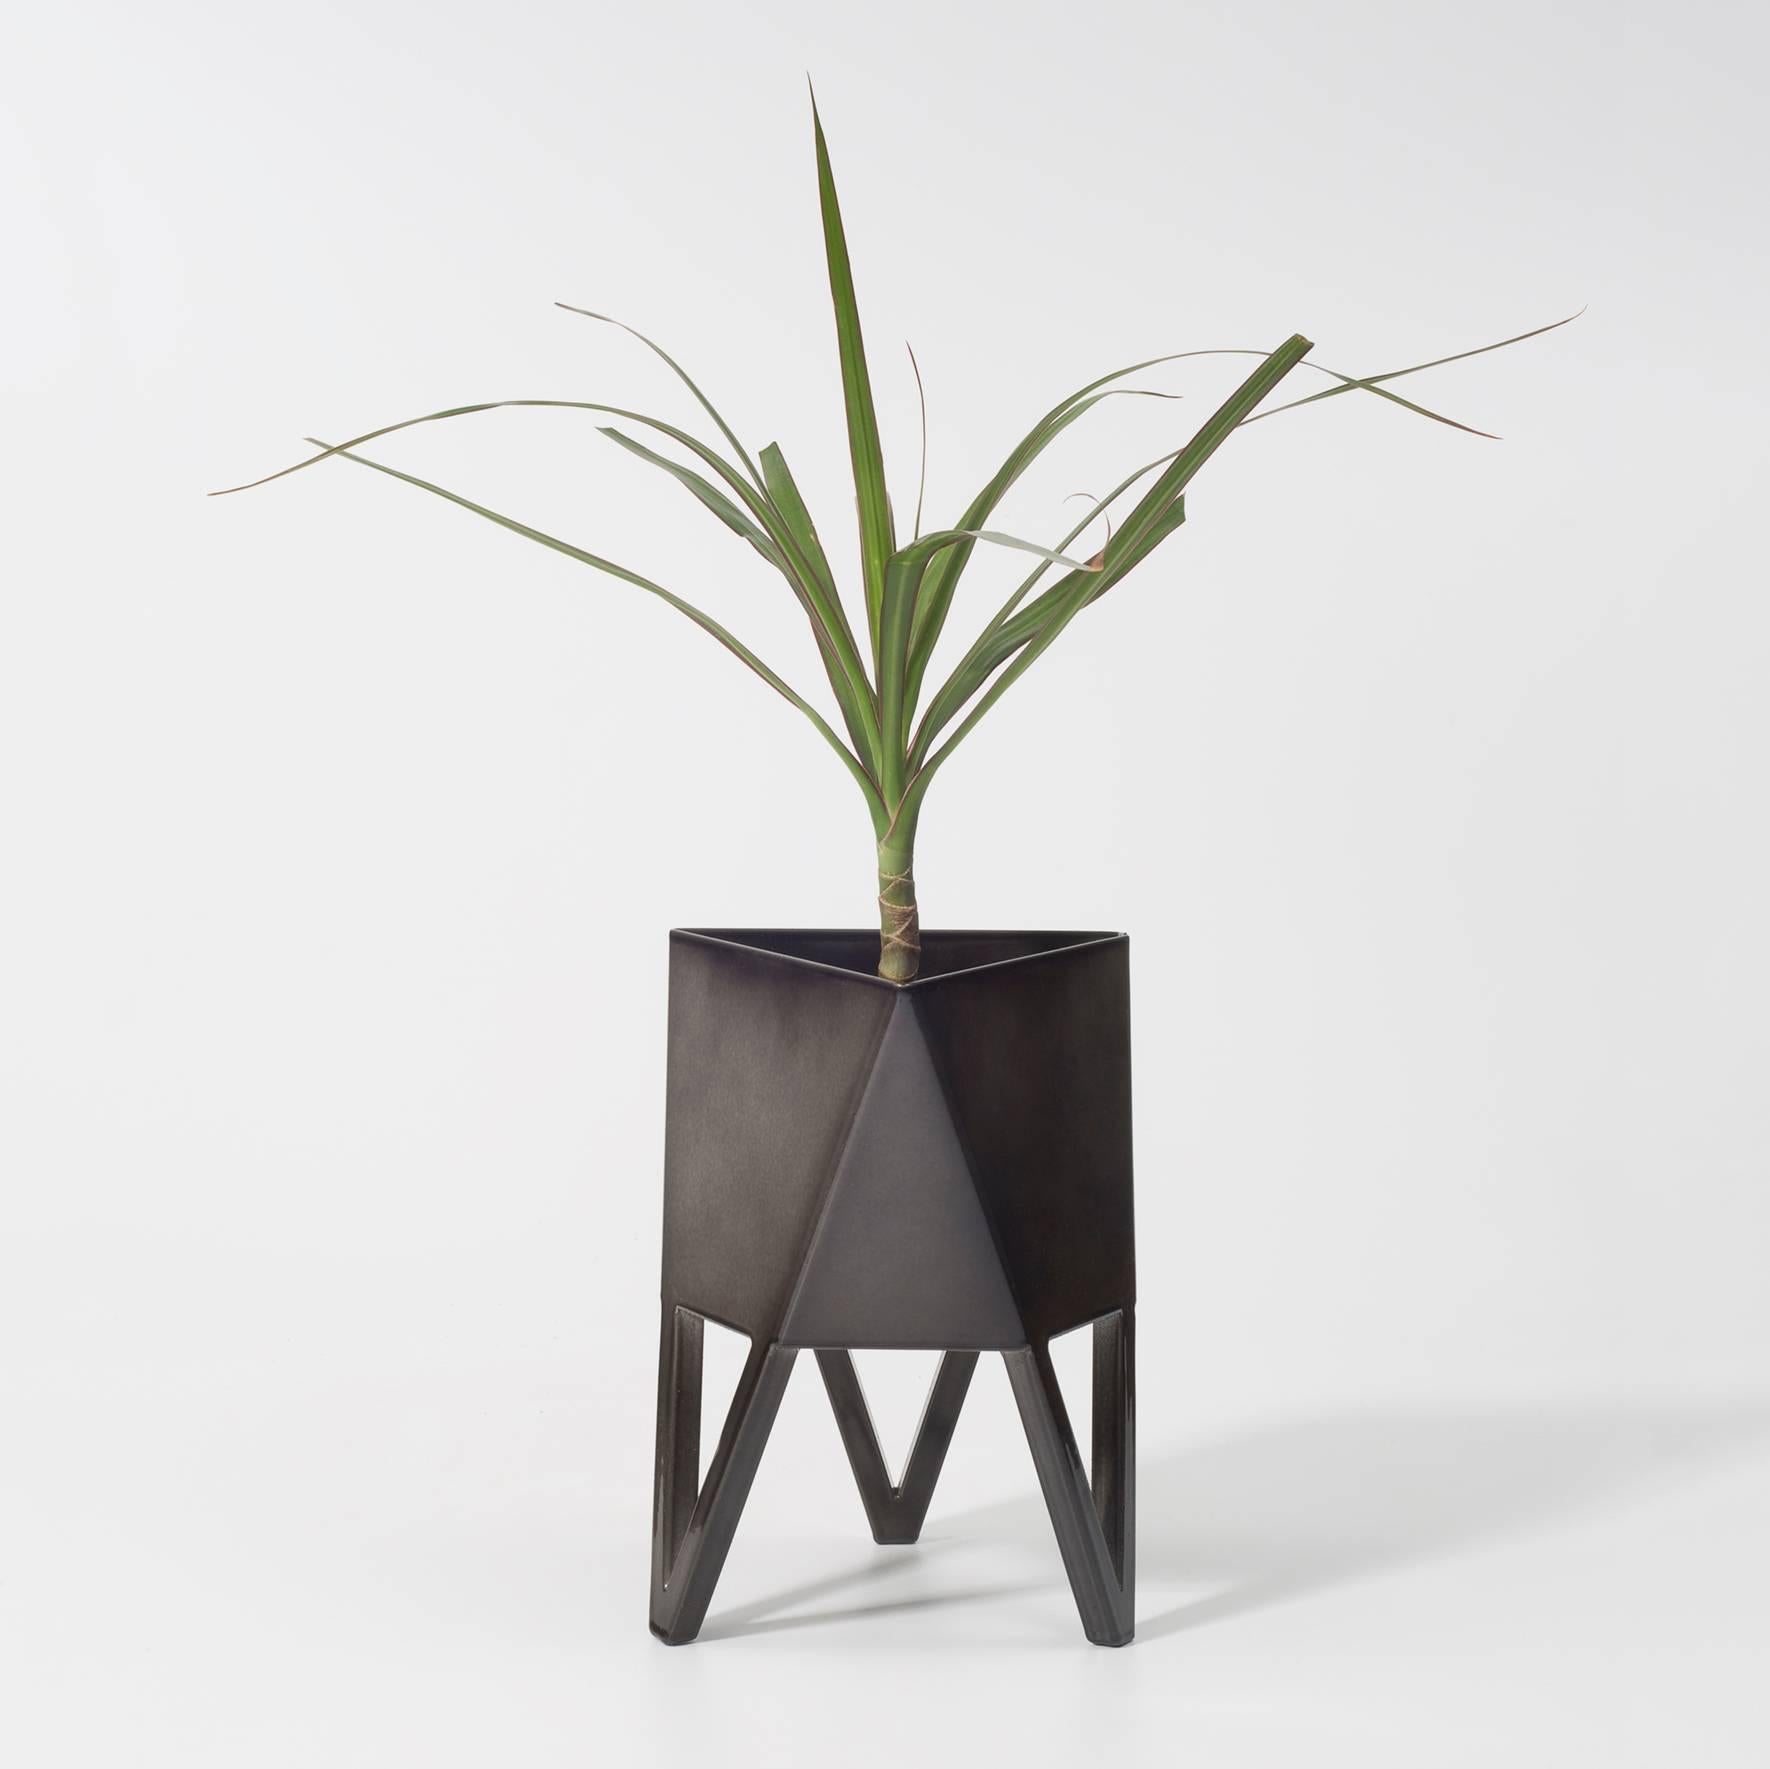 Deca Planter in Glossy Maroon Steel, Small, by Force/Collide 4